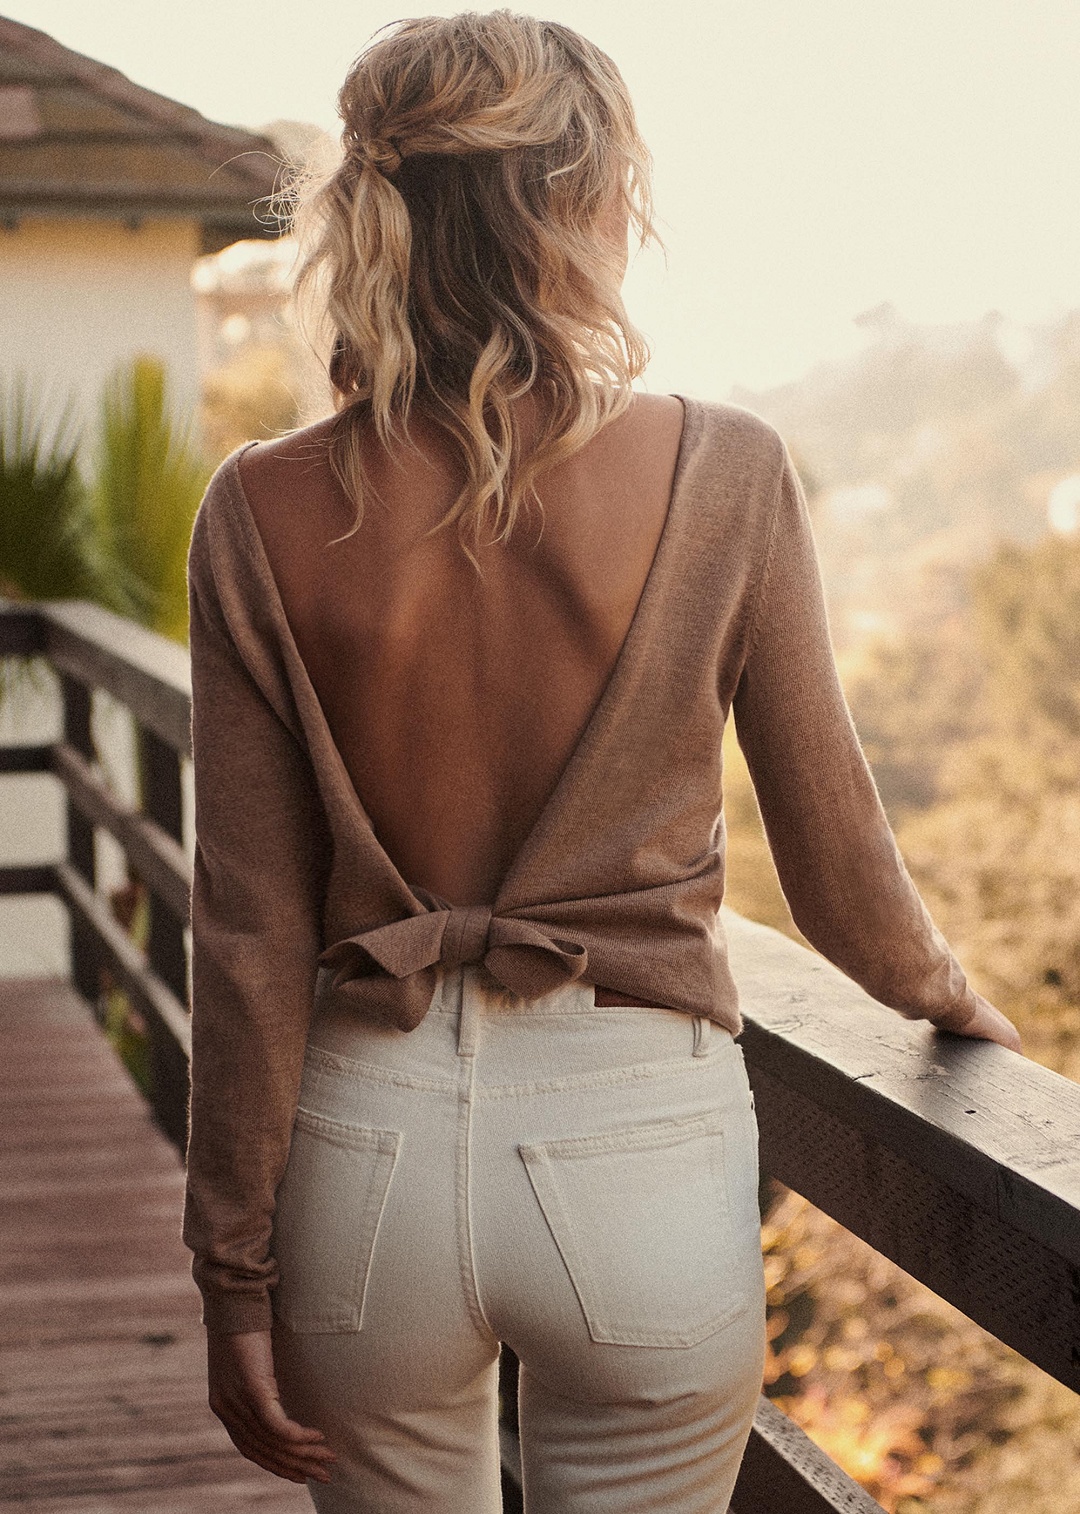 Bow Back Camel Sweater White Jeans